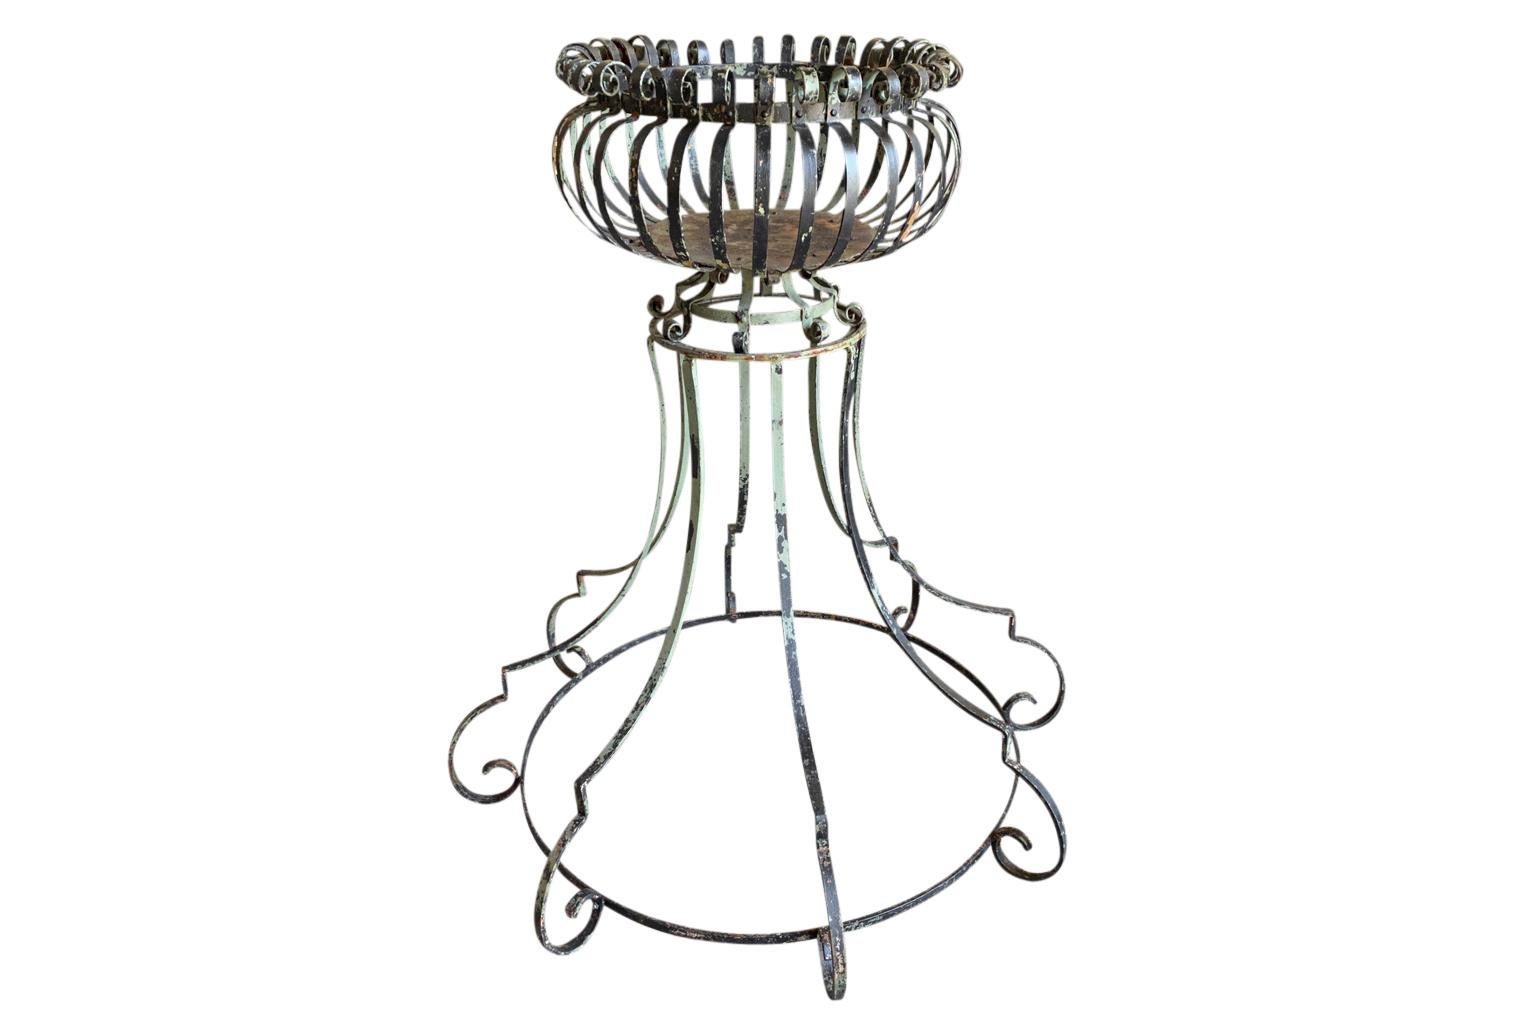 A charming later 19th century Jardiniere - Porte Plante from the South of France.  Beautifully constructed from painted iron.  A wonderful accent piece for any interior or garden.  The diameter of the top is 24 1/4